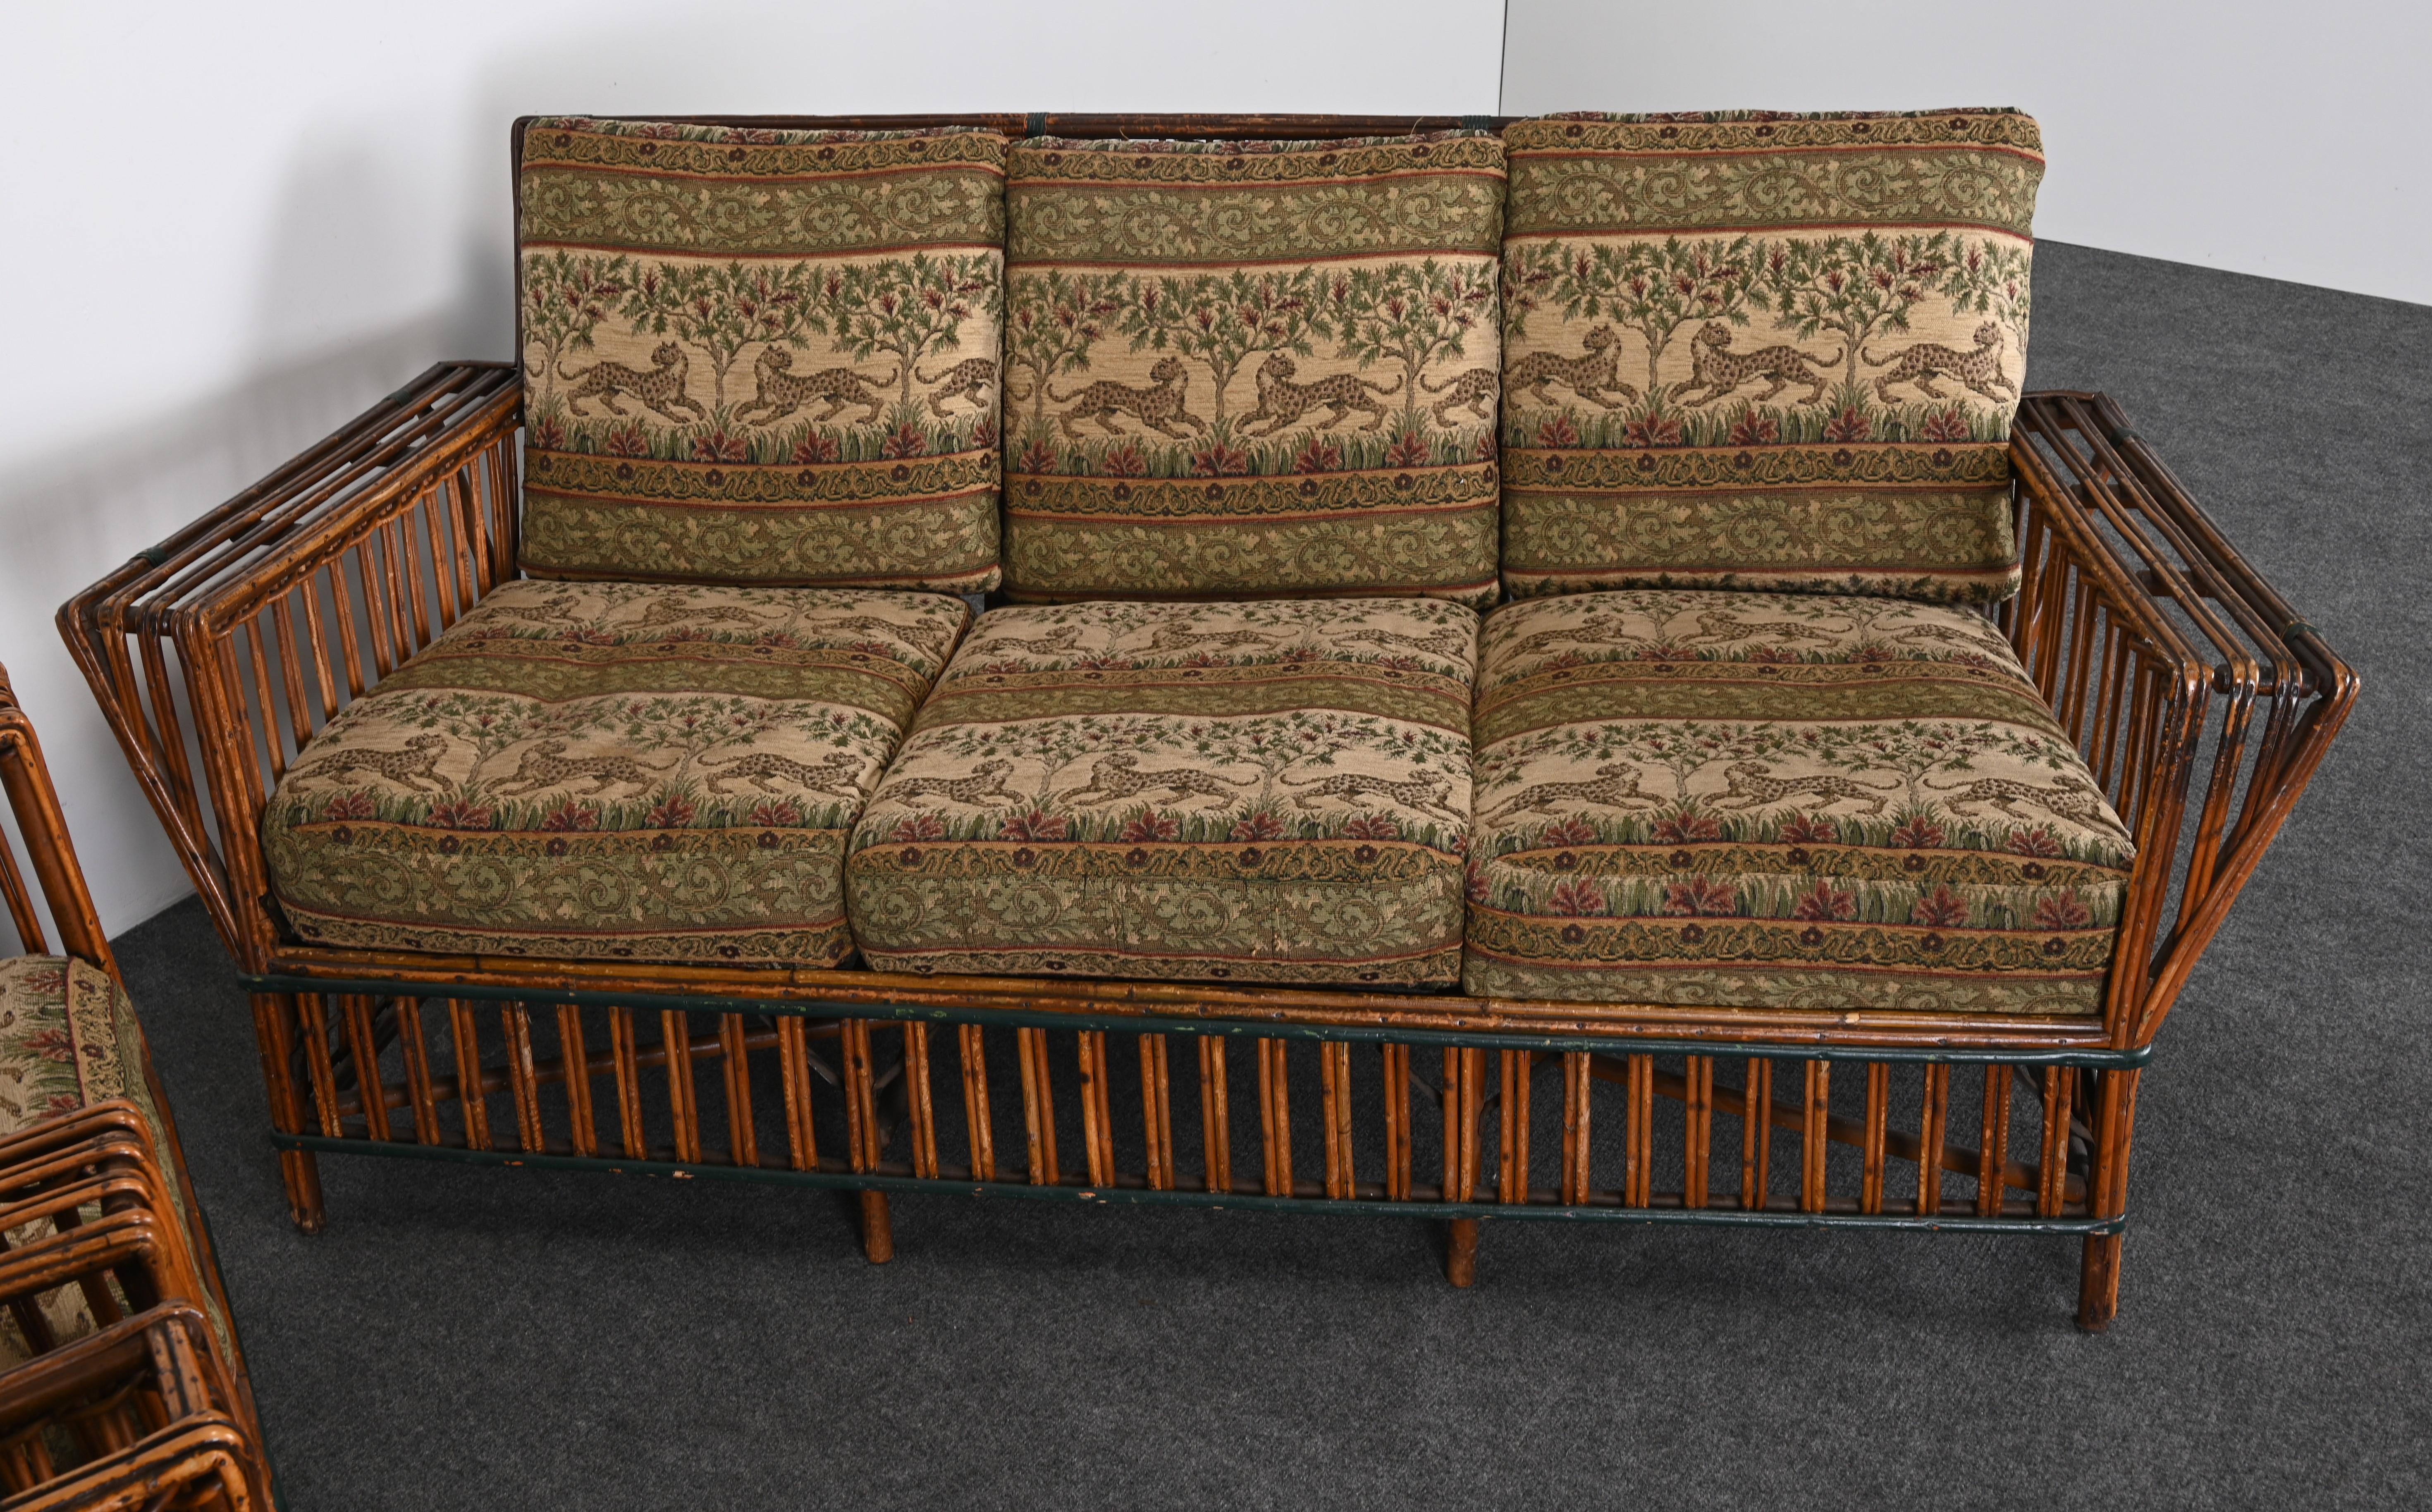 American Art Deco Split Ypsilanti Stick Reed Wicker or Sofa with Pair Arm Chairs c. 1930s For Sale